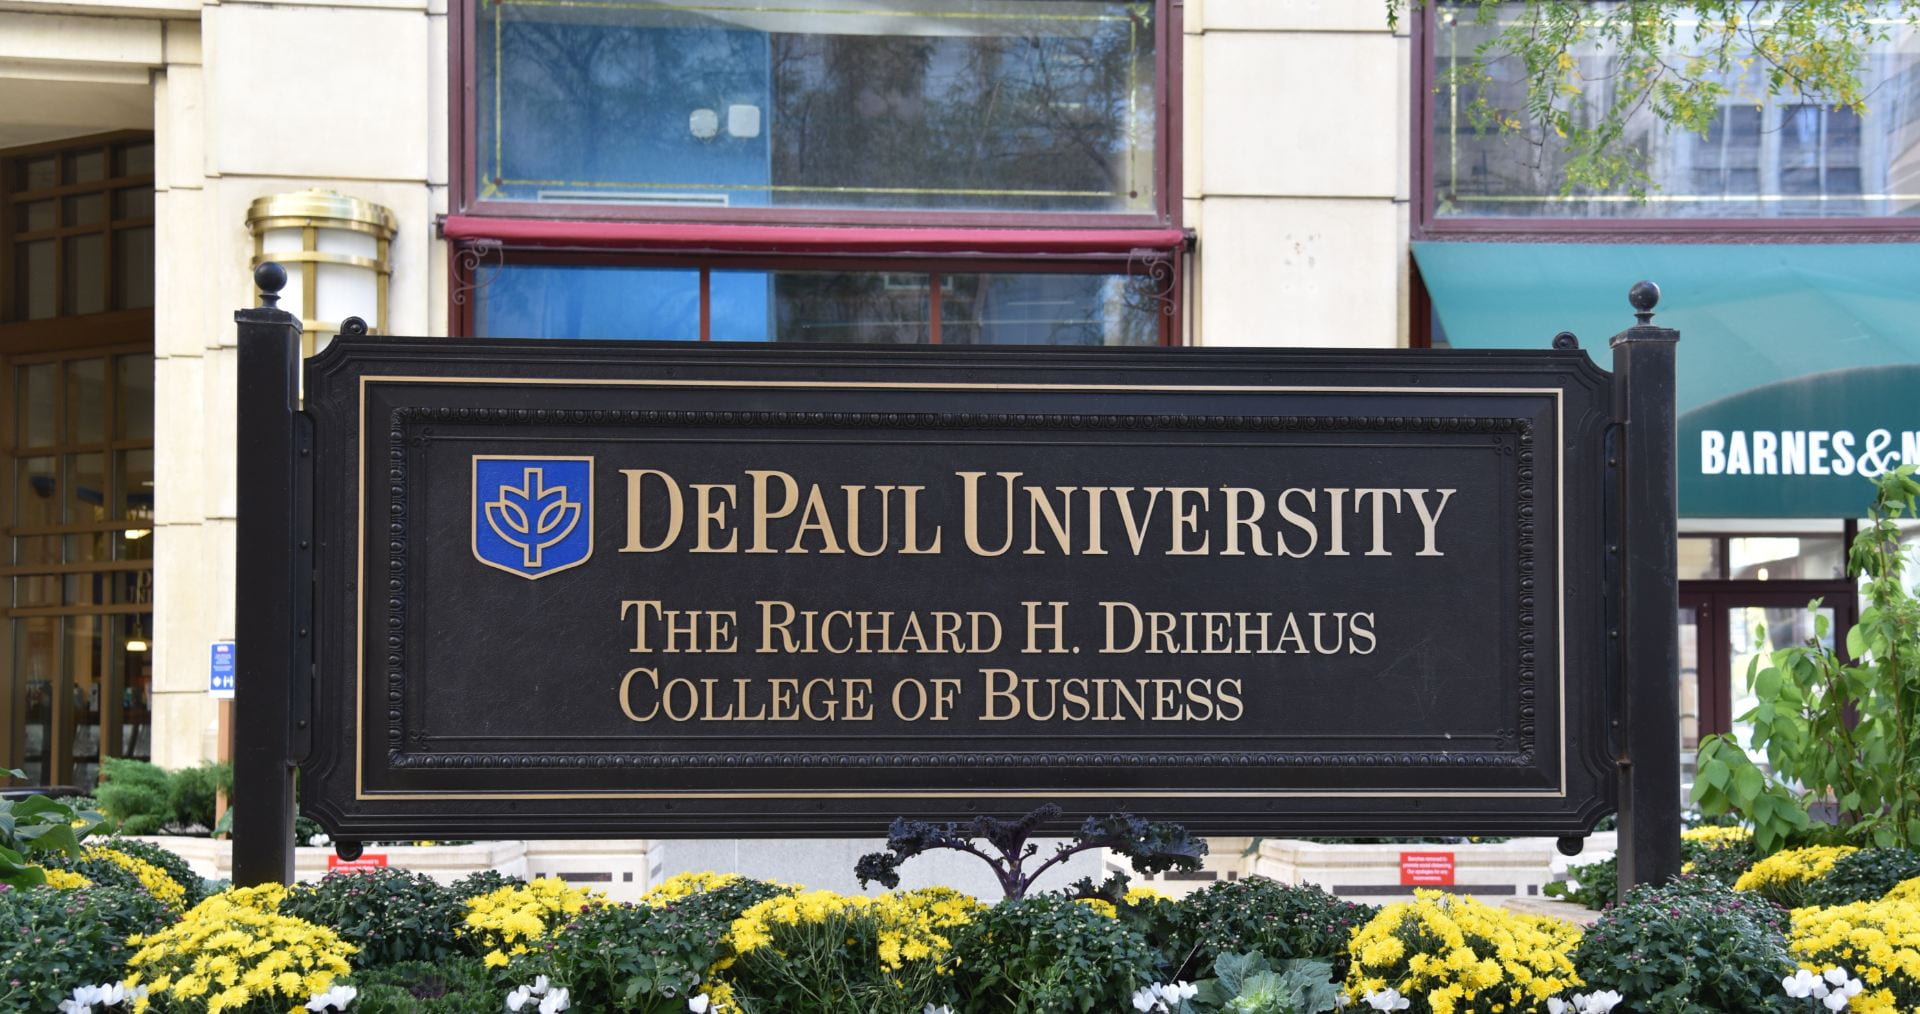 Driehaus College of Business sign